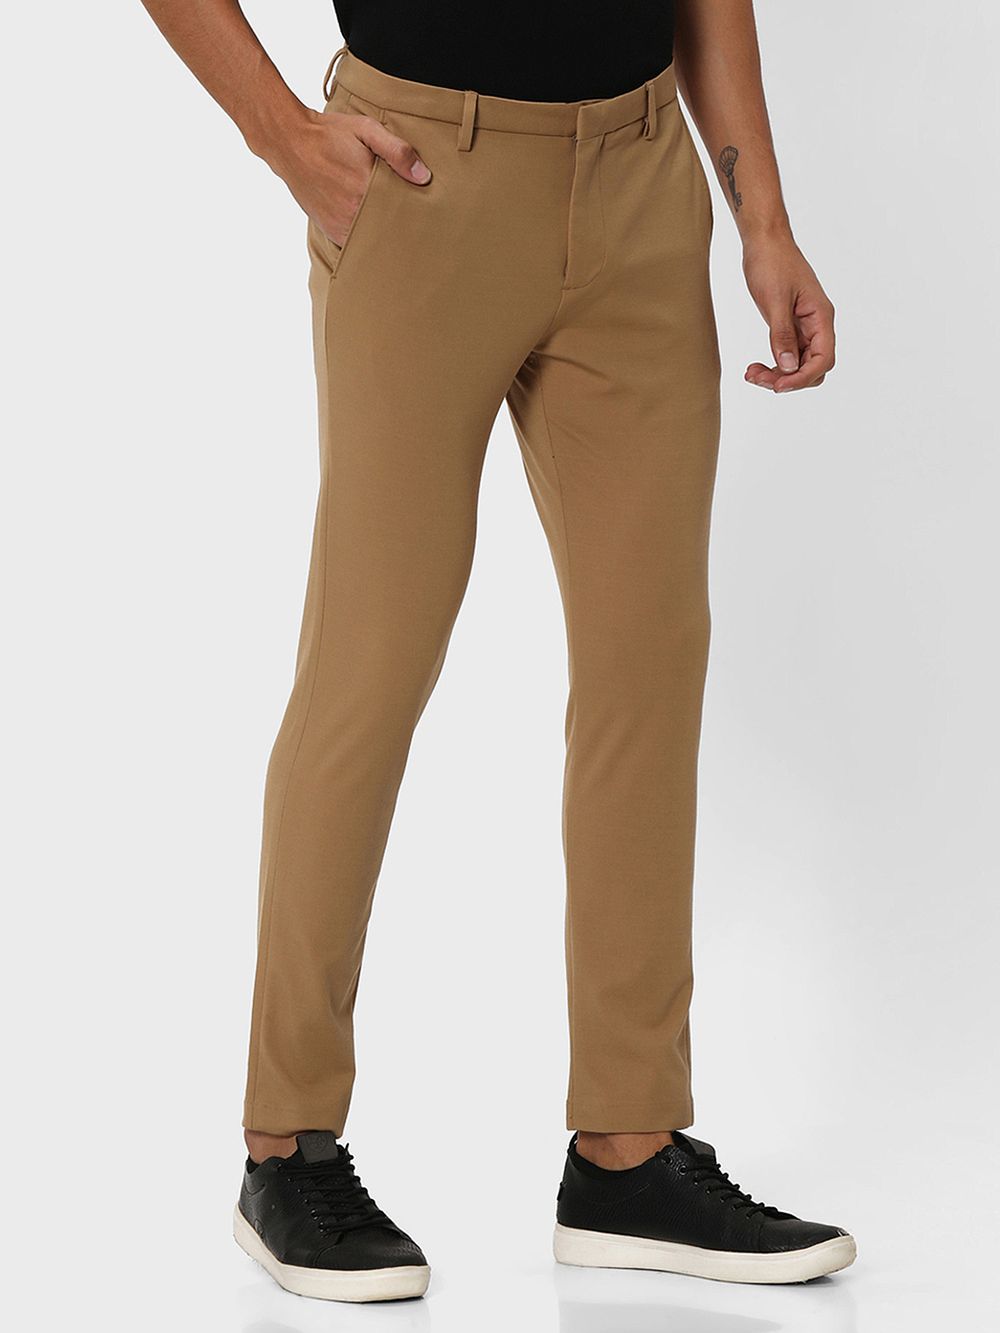 Khaki Ankle Length Stretch Chinos Trouser